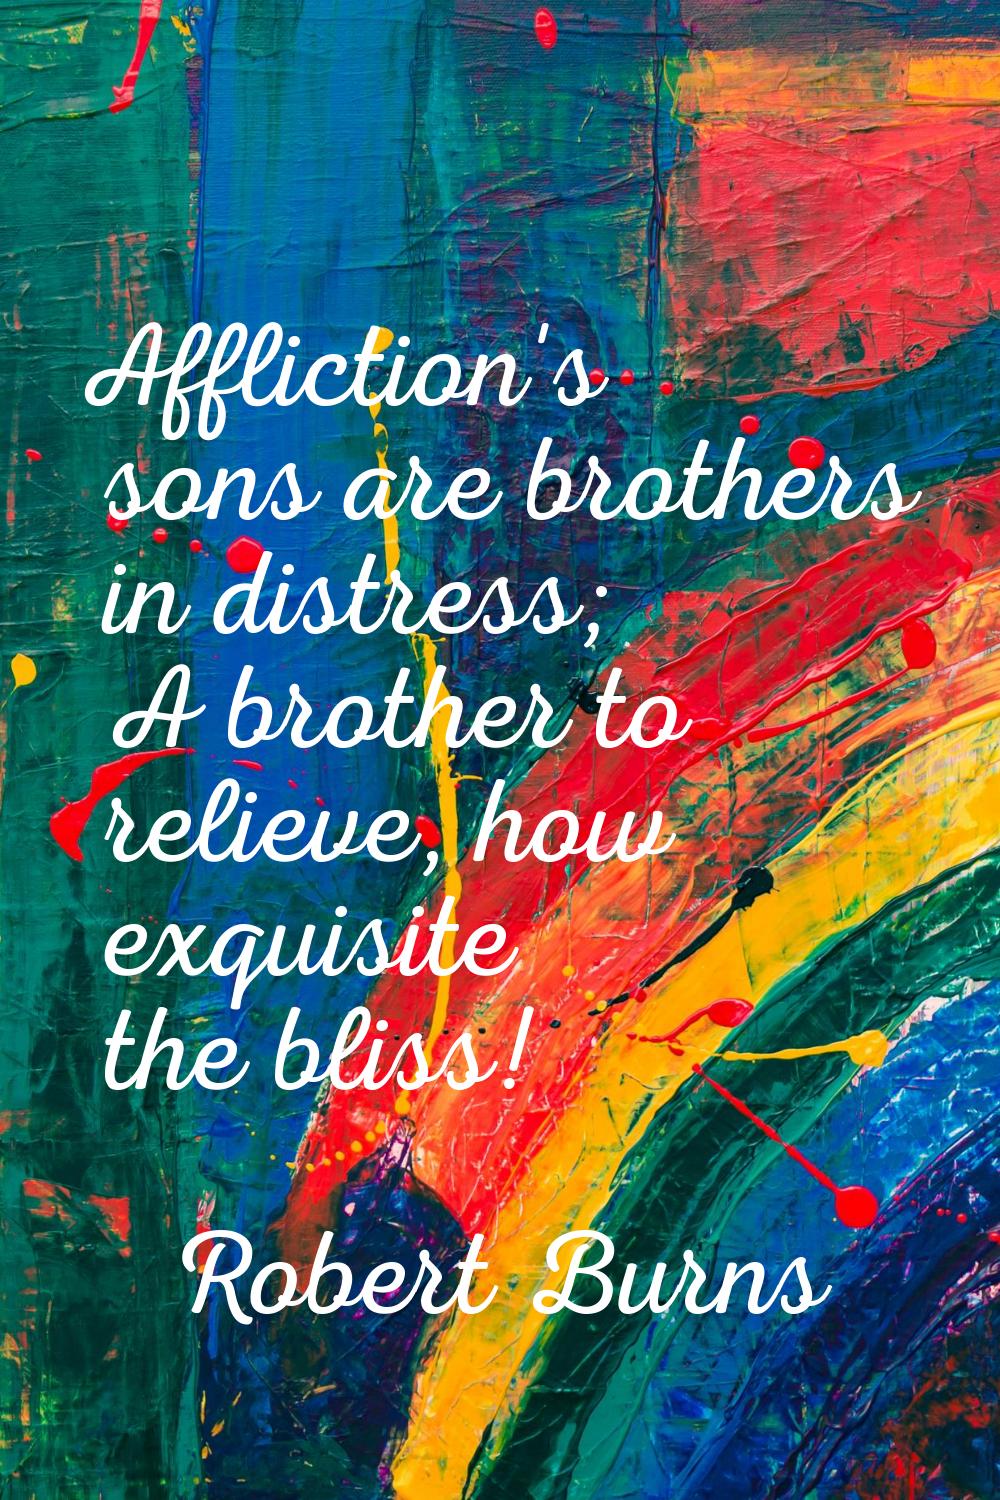 Affliction's sons are brothers in distress; A brother to relieve, how exquisite the bliss!